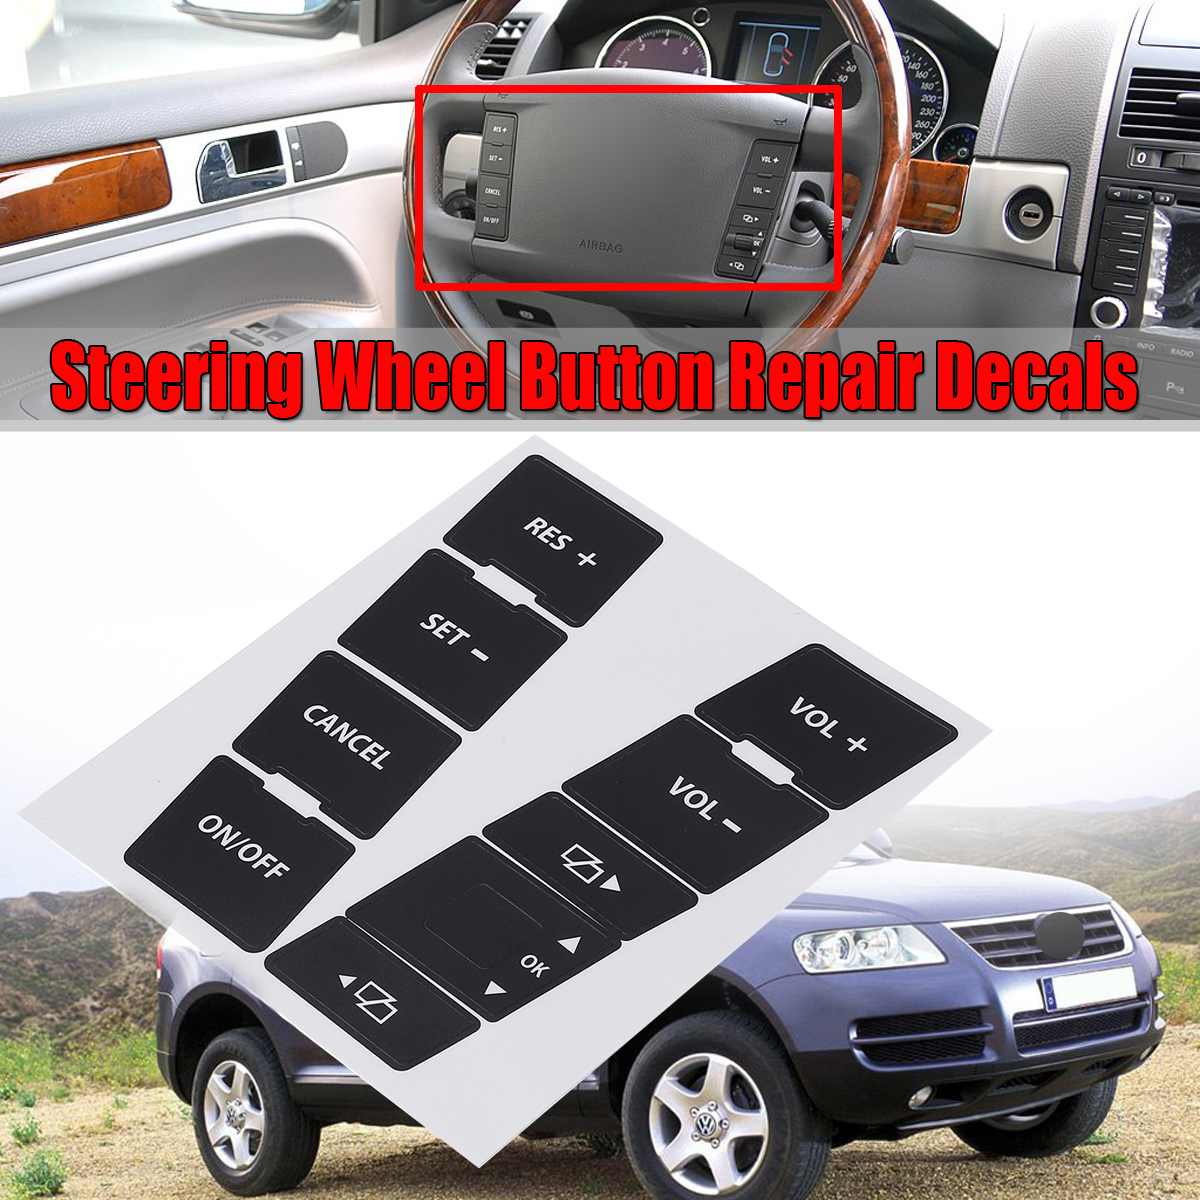 Car Steering Wheel Button Repair Decals Stickers Kit For VW For Volkswagen Touareg 2004-2009